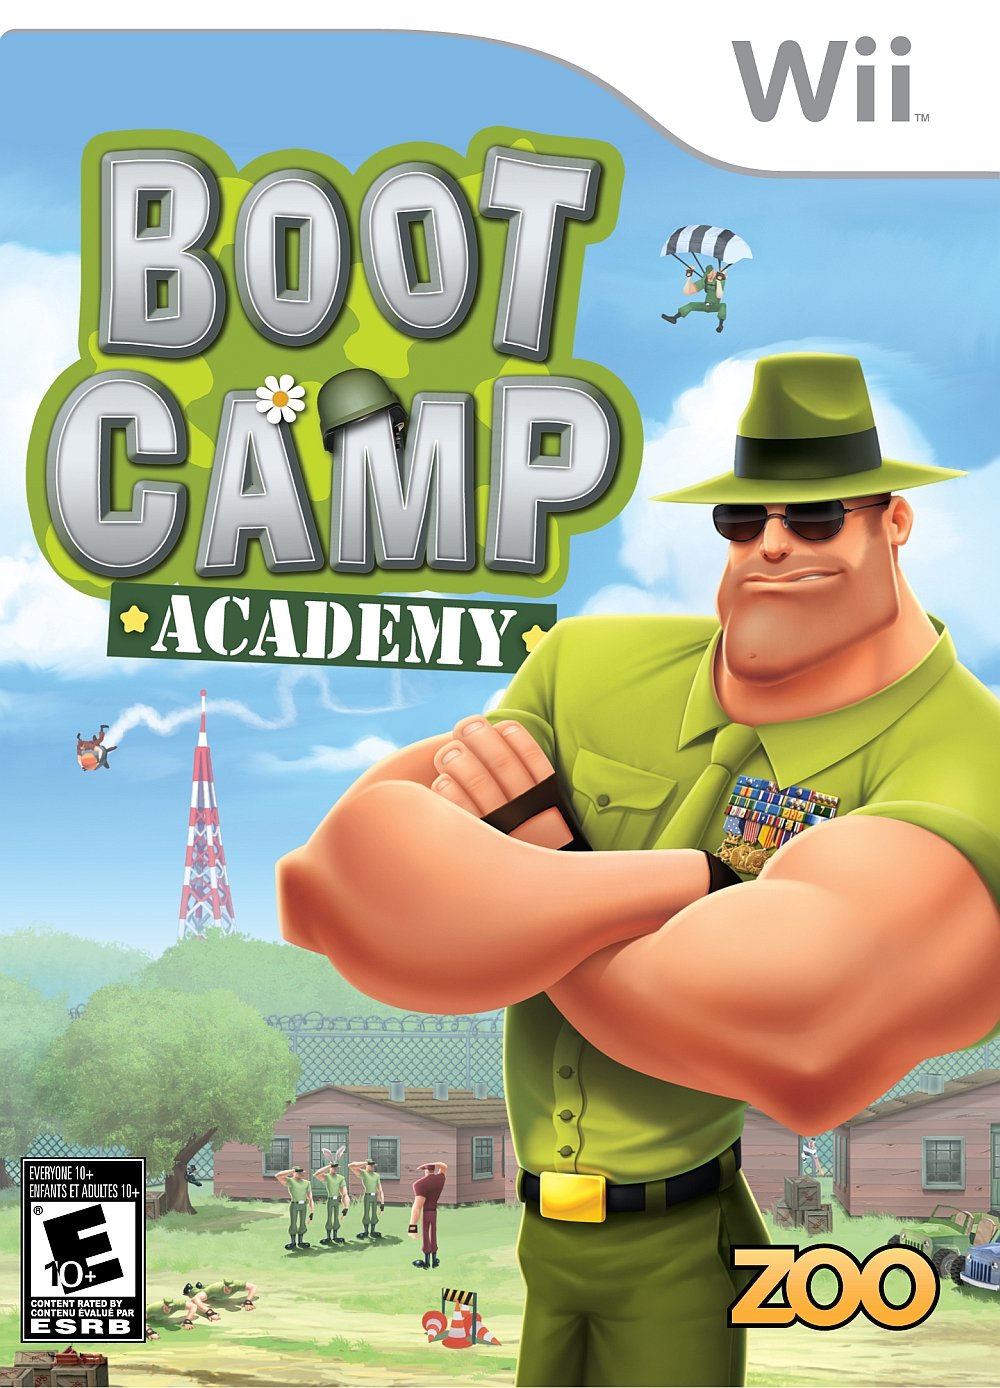 Image of Boot Camp Academy